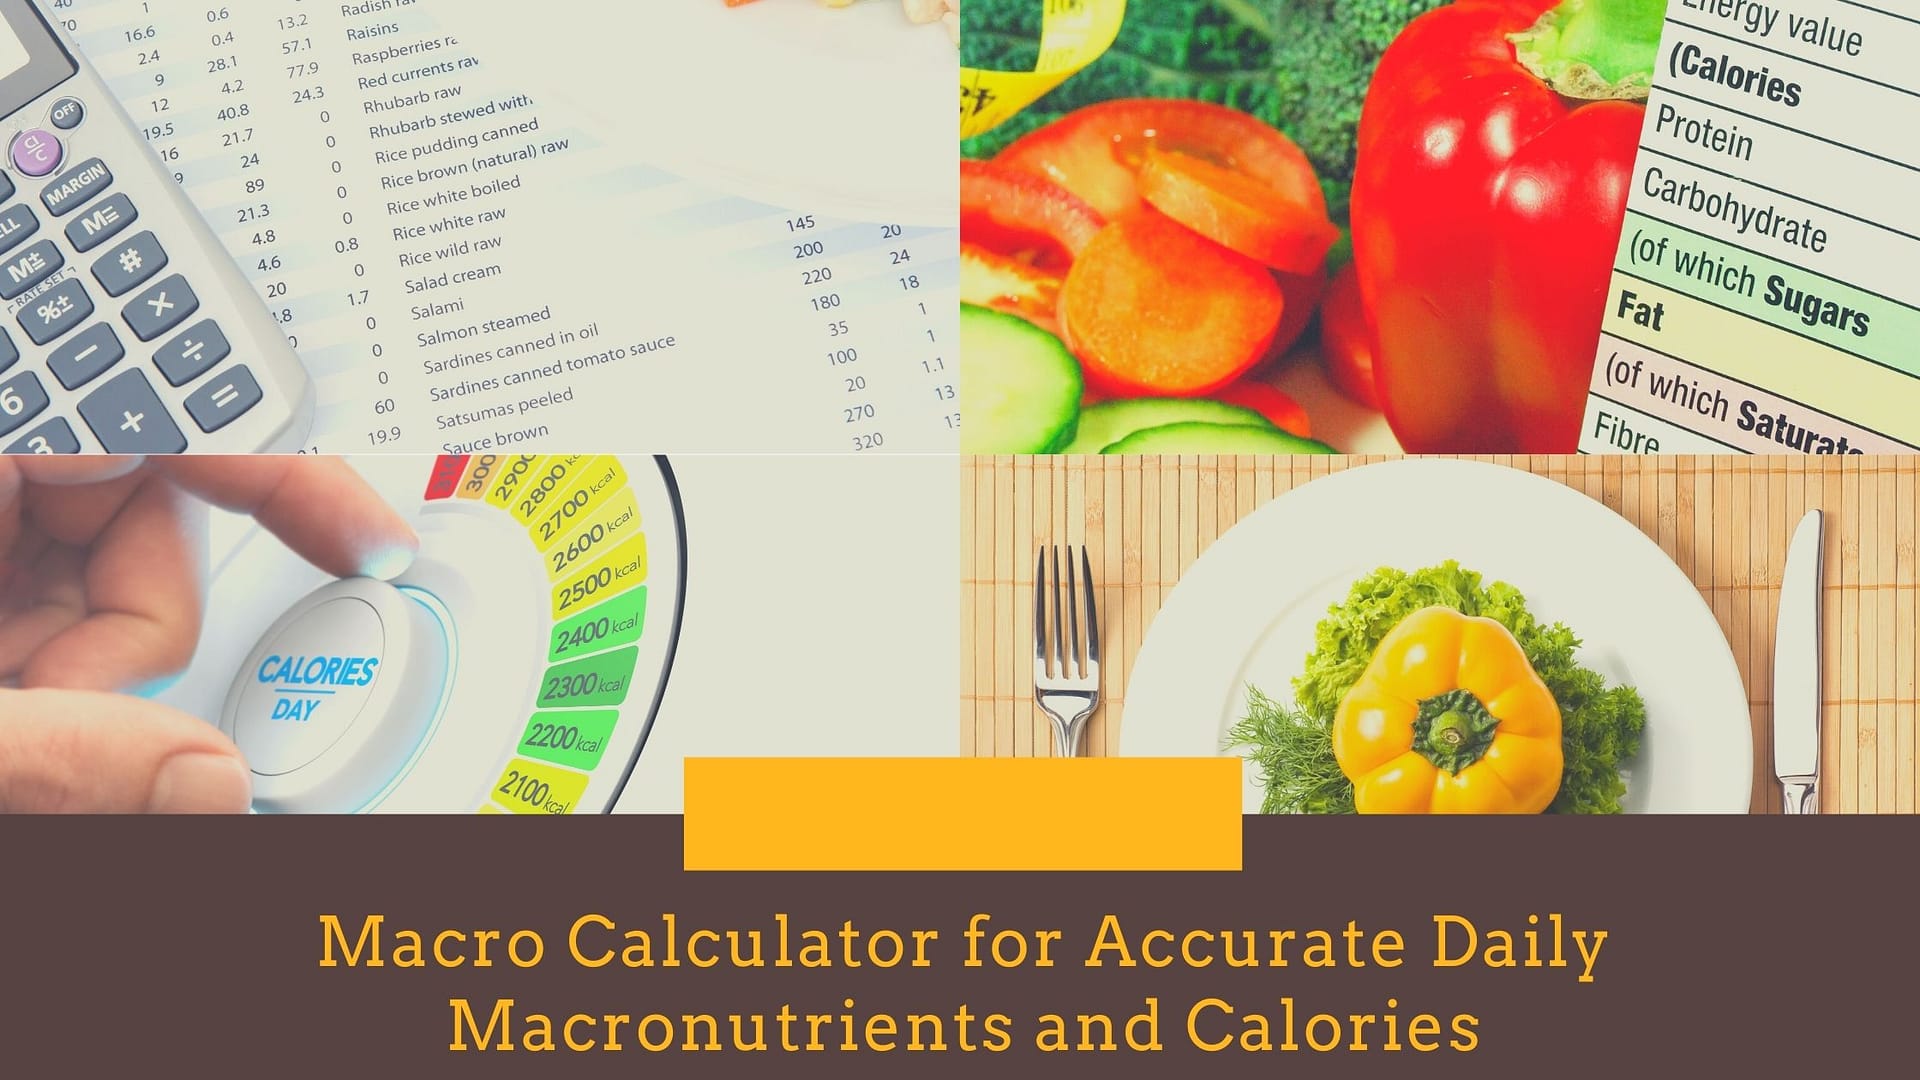 Macro Calculator for Accurate Daily Macronutrients and Calories